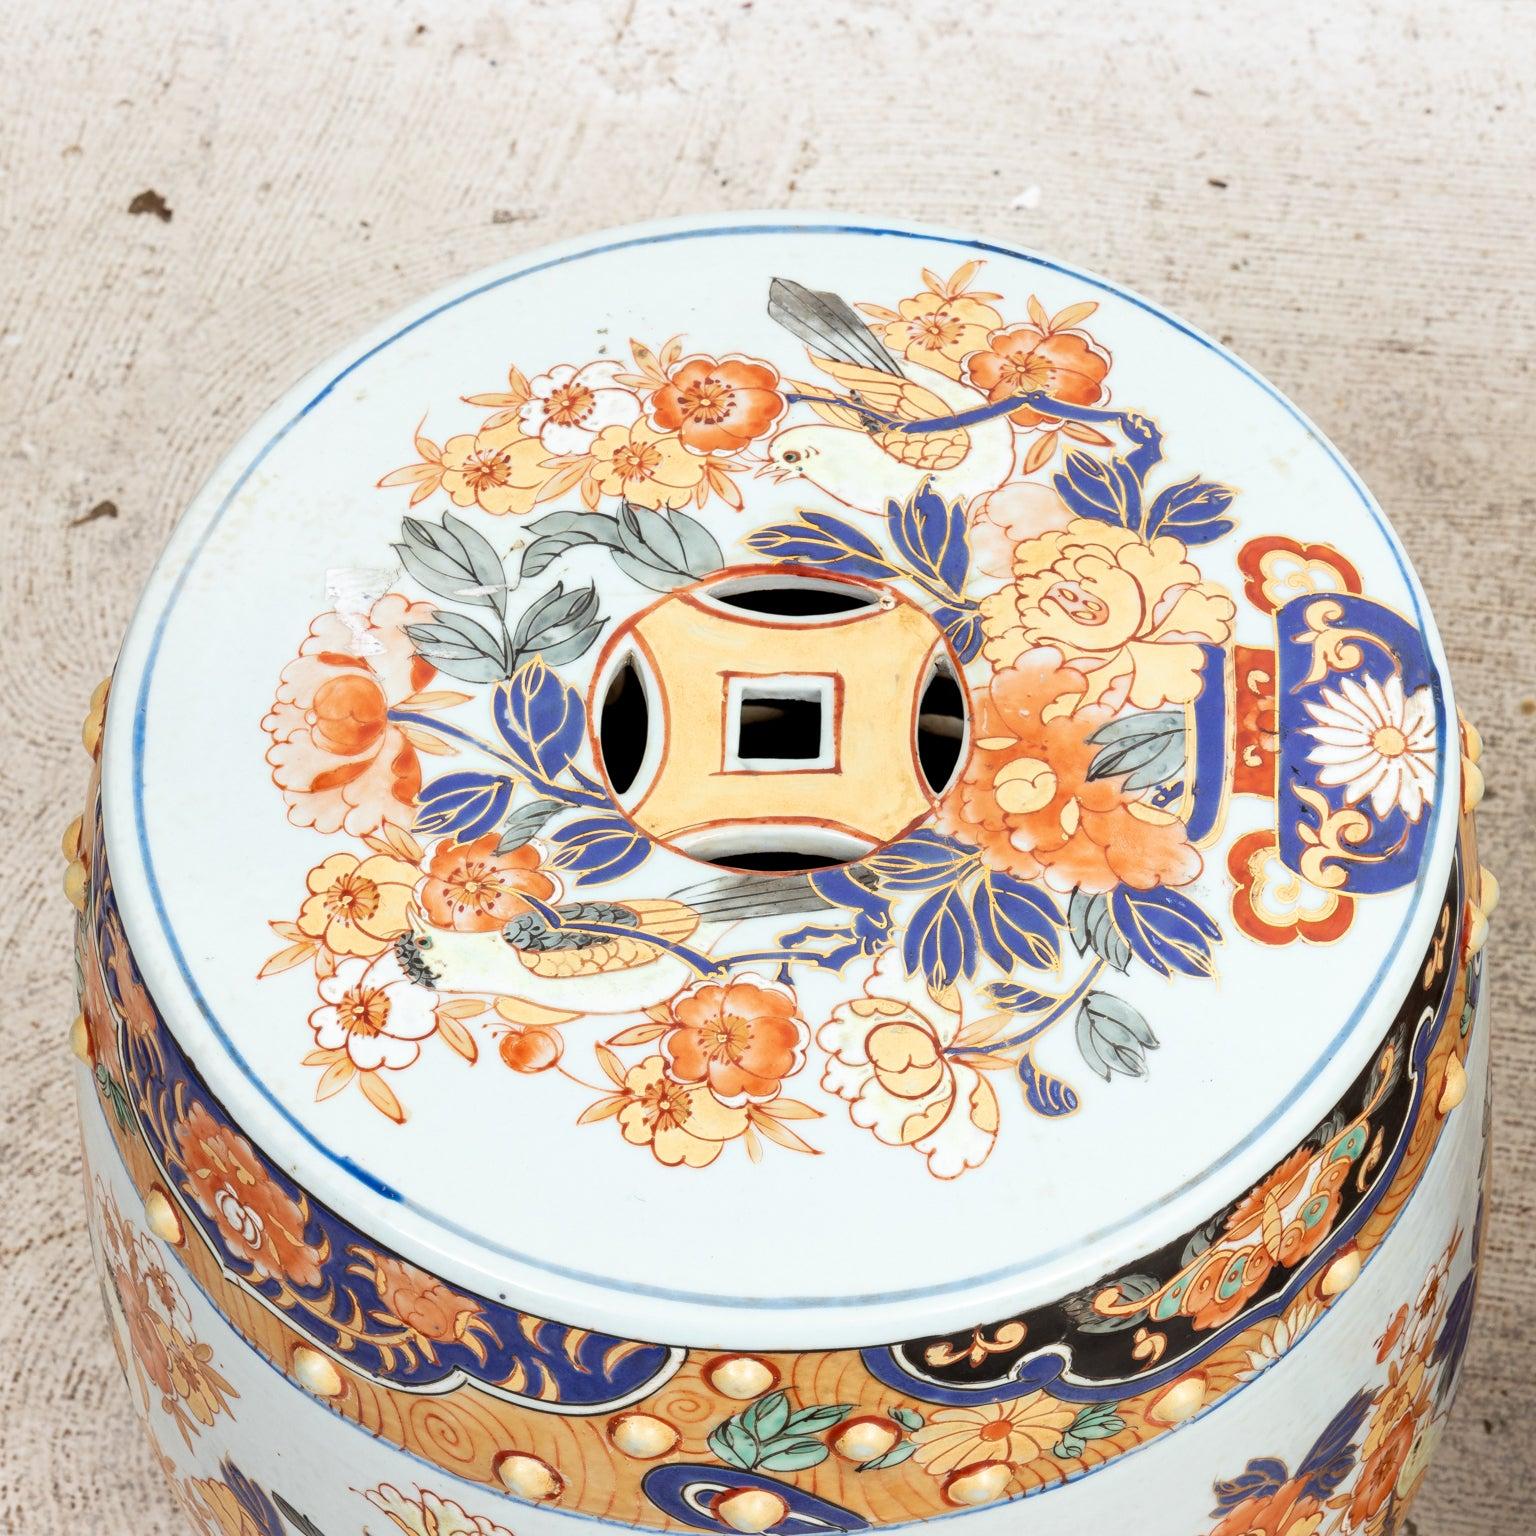 Circa 20th century pair of Chinese style painted Porcelain garden seats with multi-colored floral motifs throughout. Please note of wear consistent with age including minor chips to the paint.